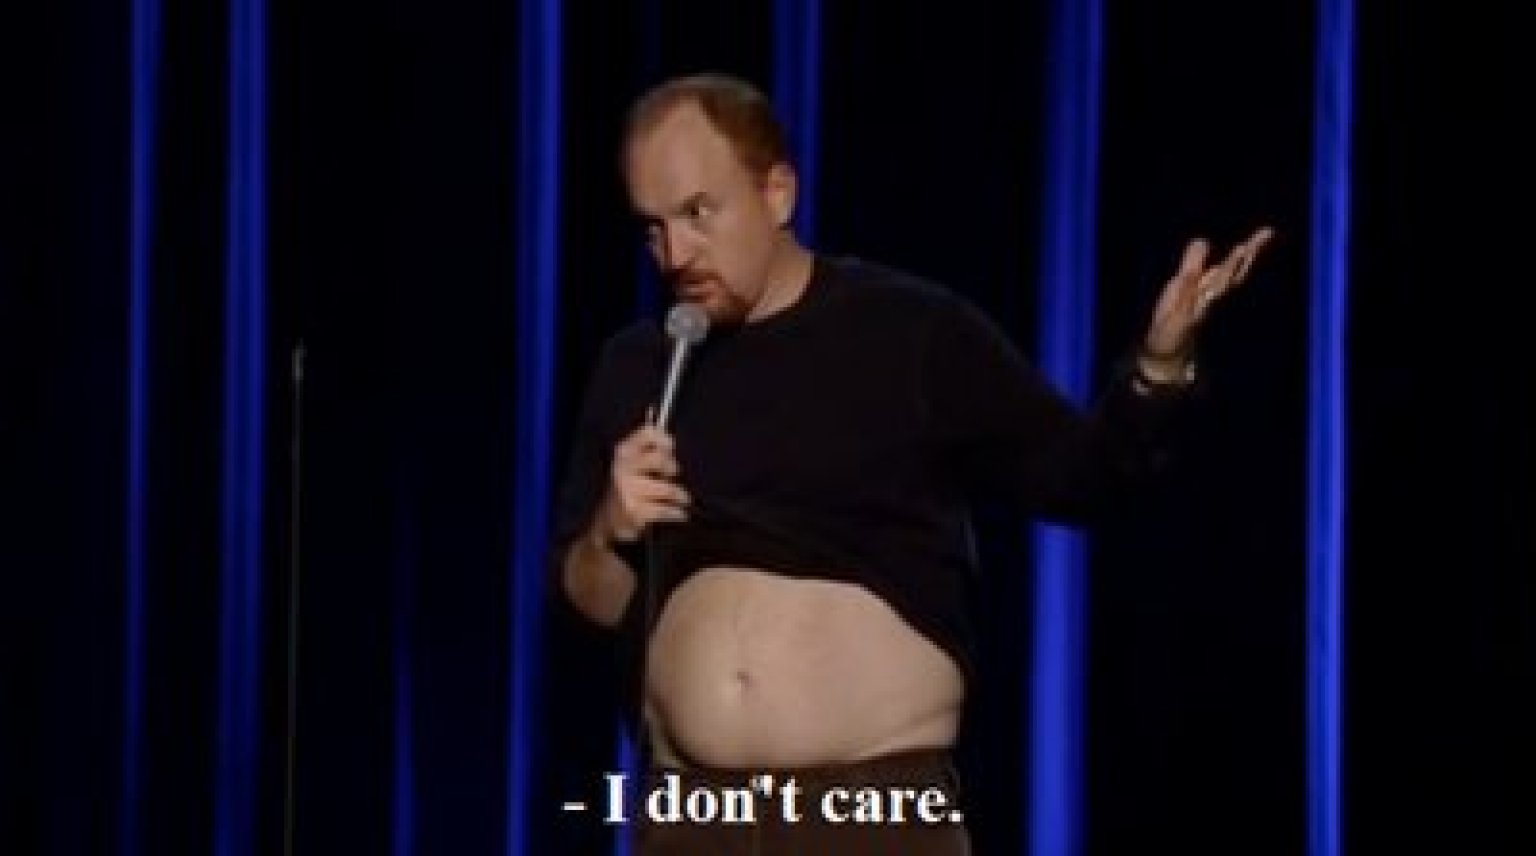 Louis C.K. just doesn't care